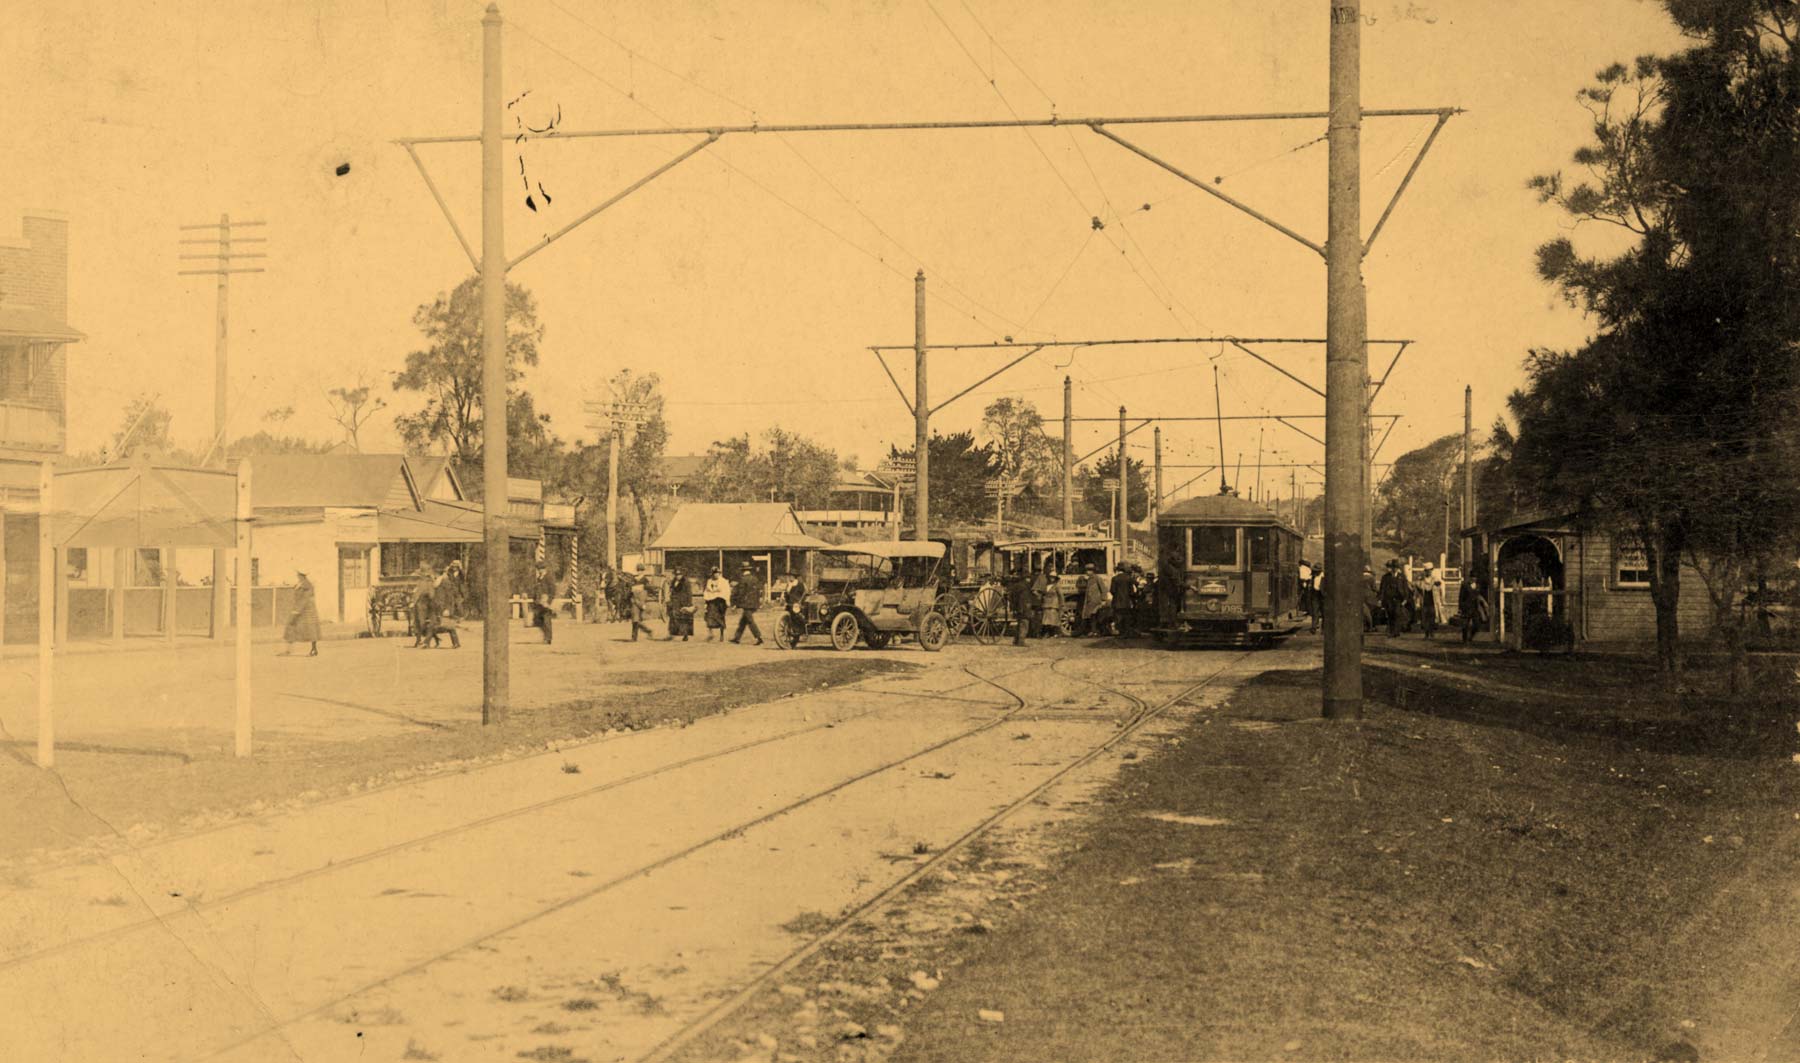 Tram to Narrabeen a black and white pictures